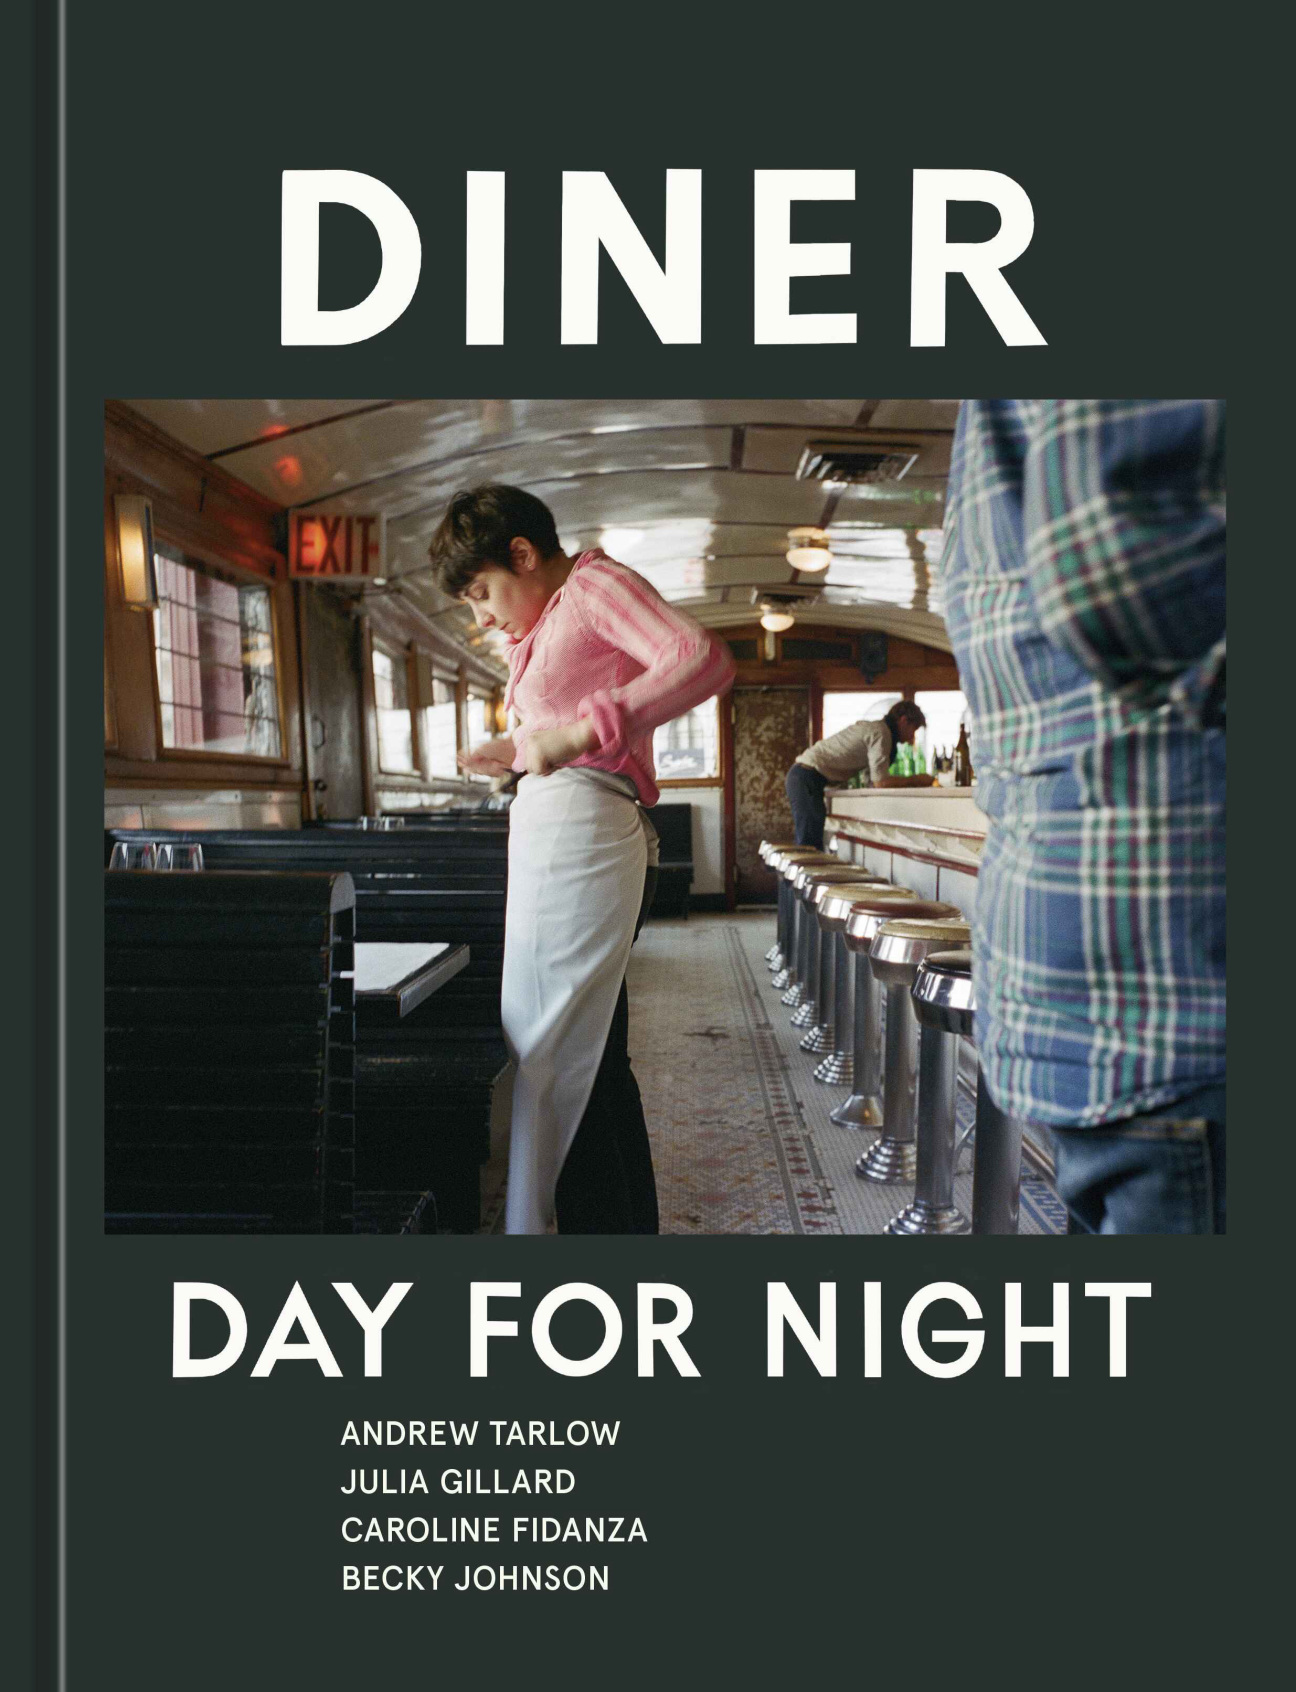 diner-day-for-night-brooklyn